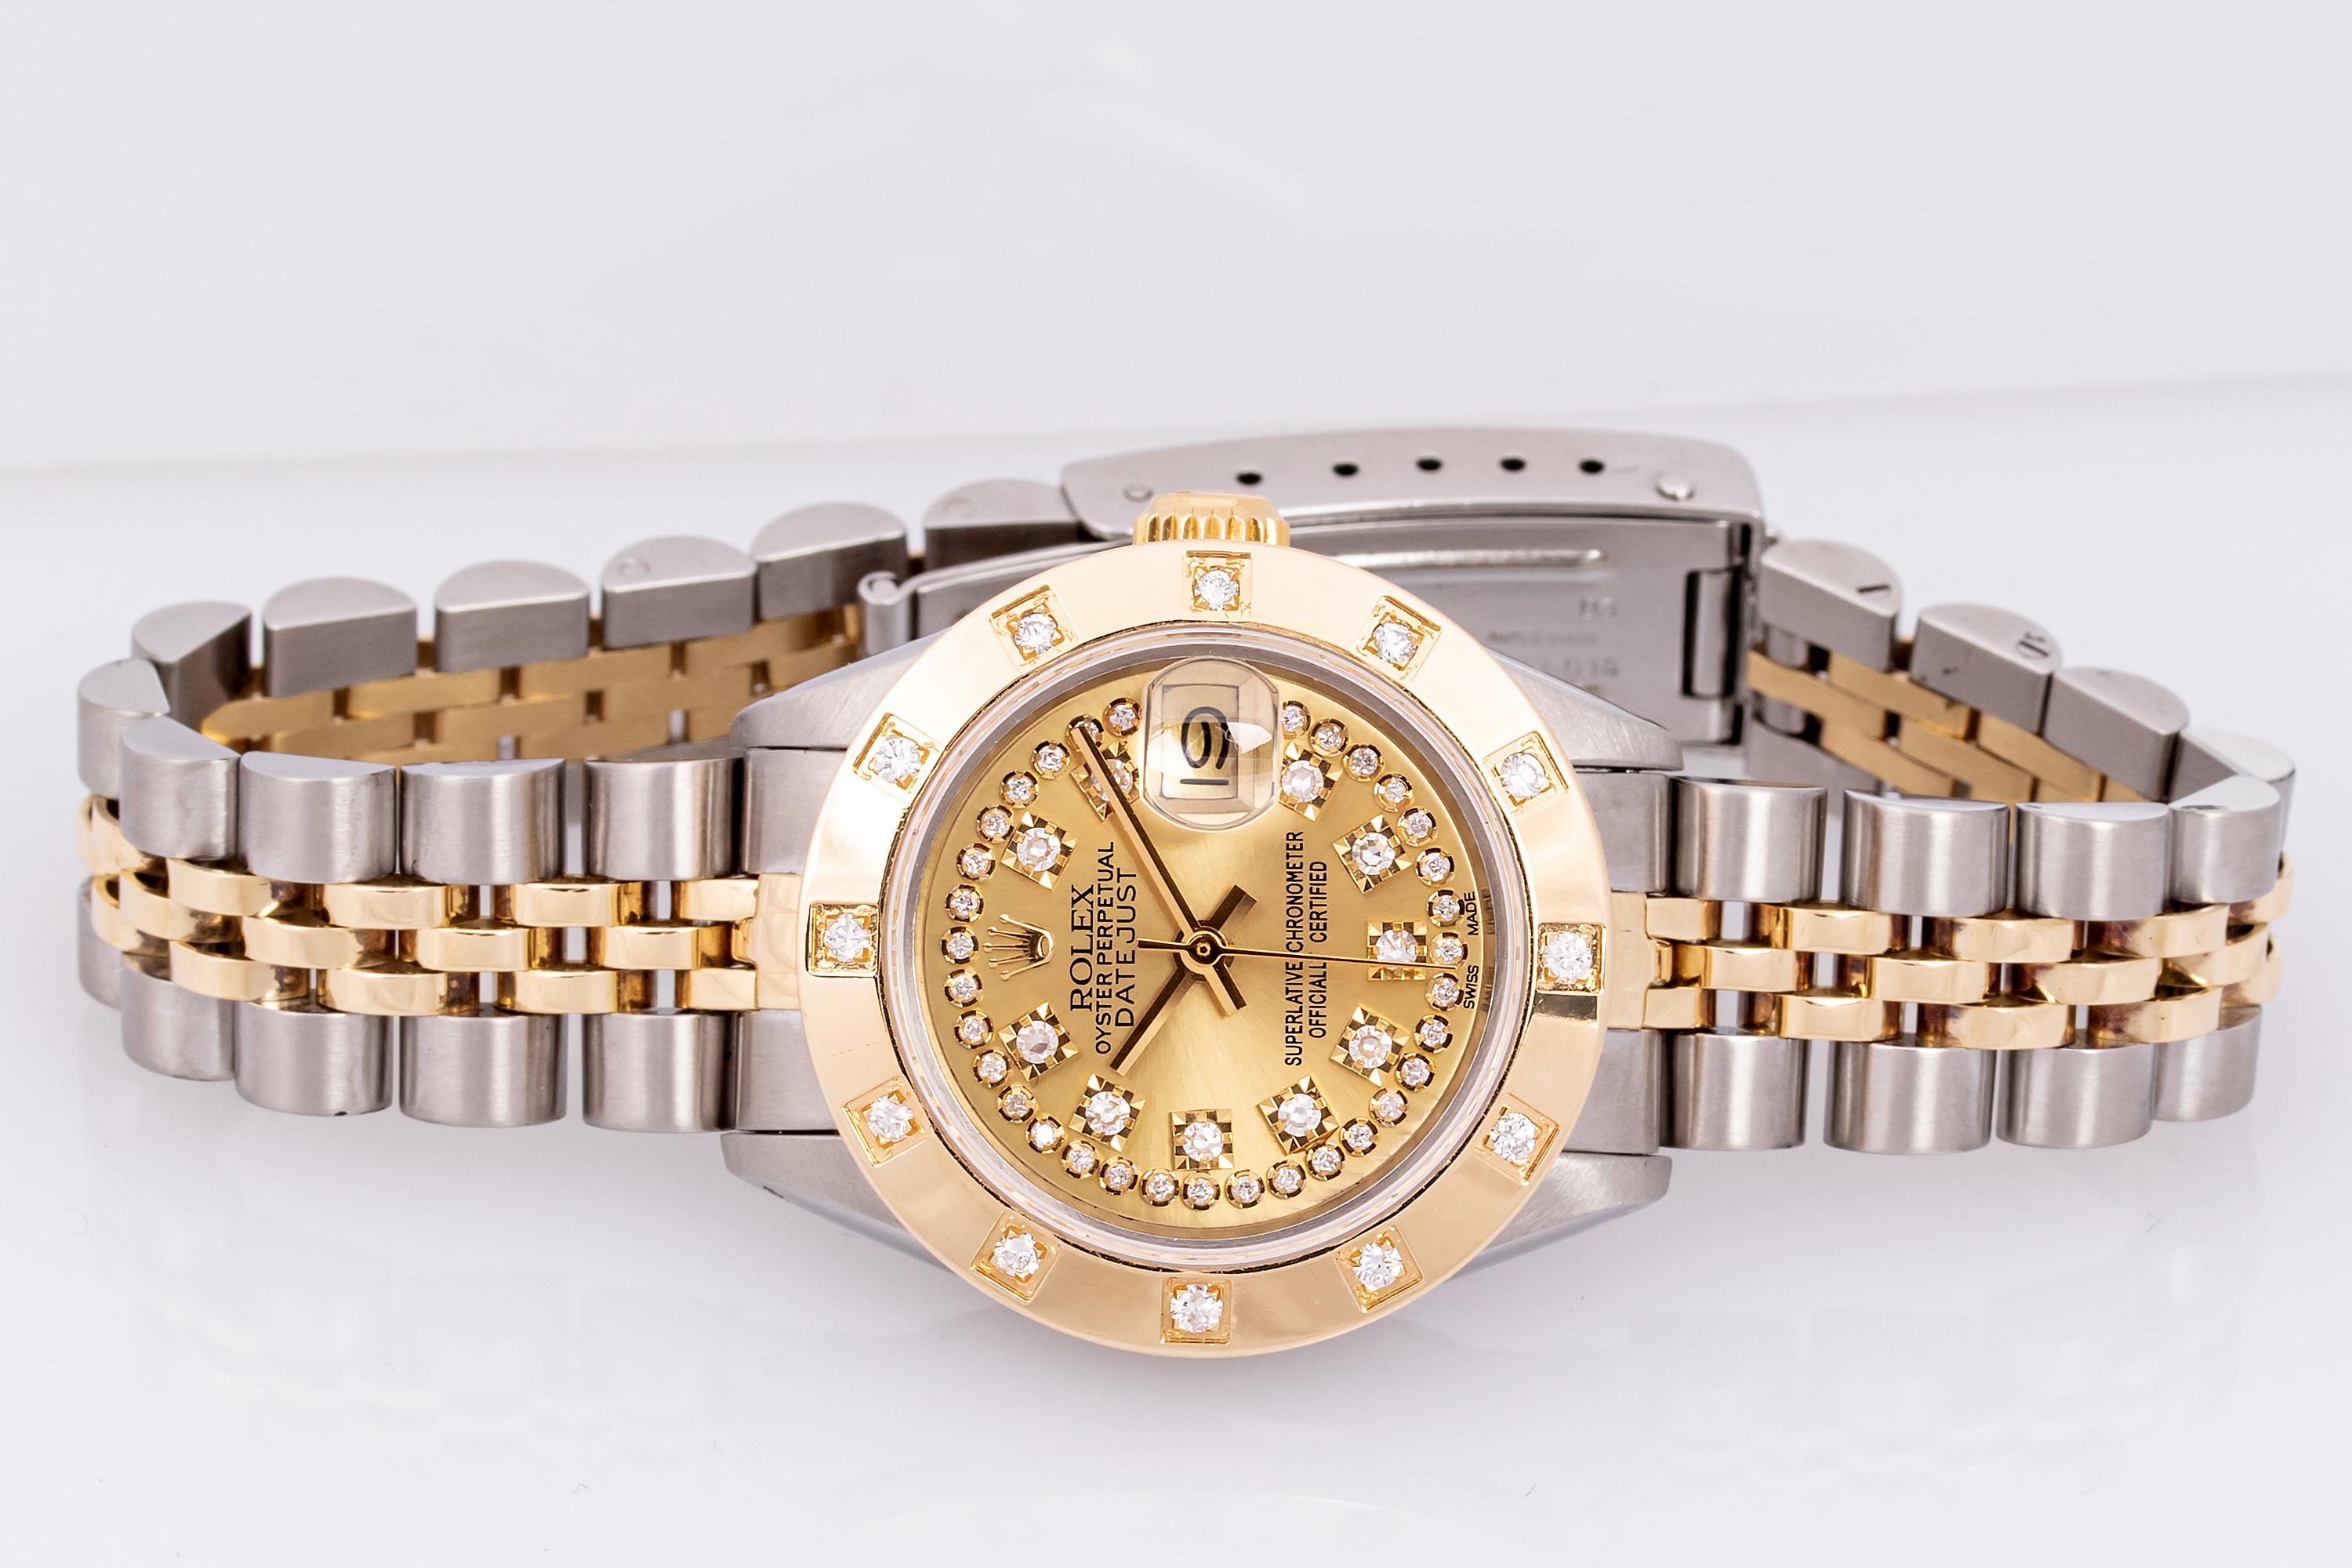 Rolex Lady DateJust Champagne String Dial-Steel and 18k Gold Diamond Bezel Watch In Good Condition For Sale In Los Angeles, CA